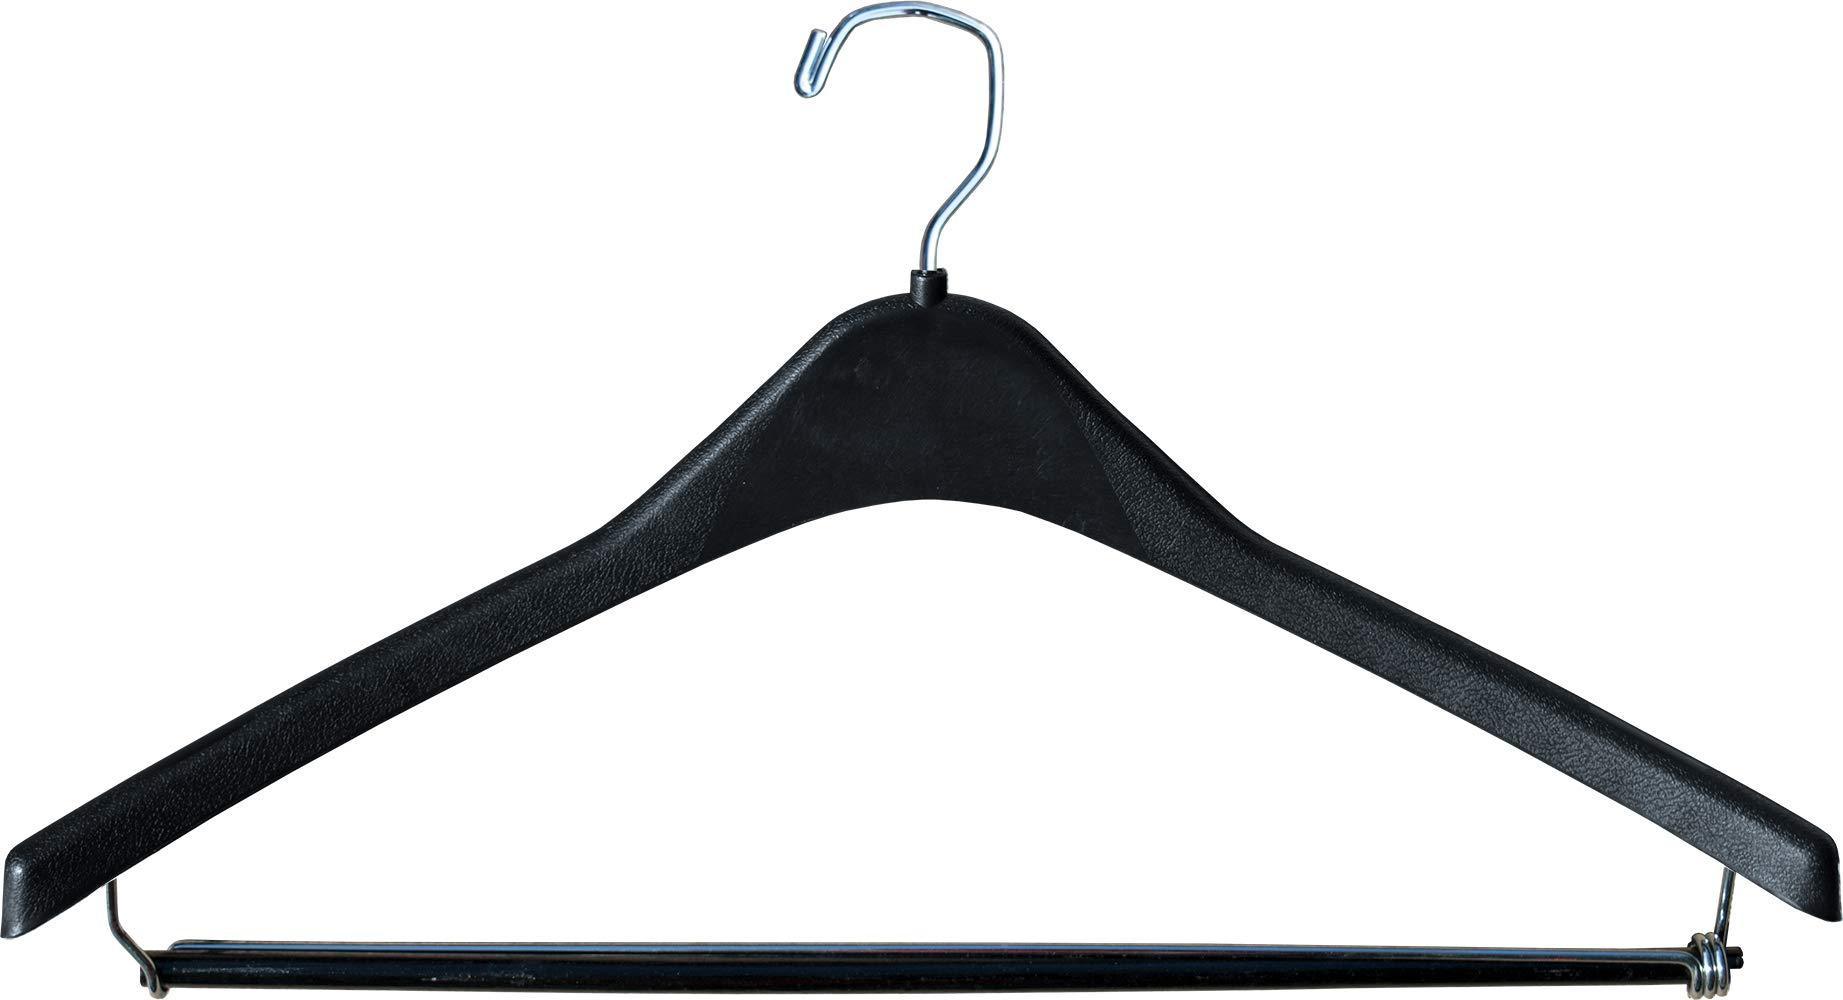 Buy the great american hanger company heavy duty black plastic suit hanger with locking wooden pant bar box of 100 1 2 inch thick curved hangers for uniforms and coats